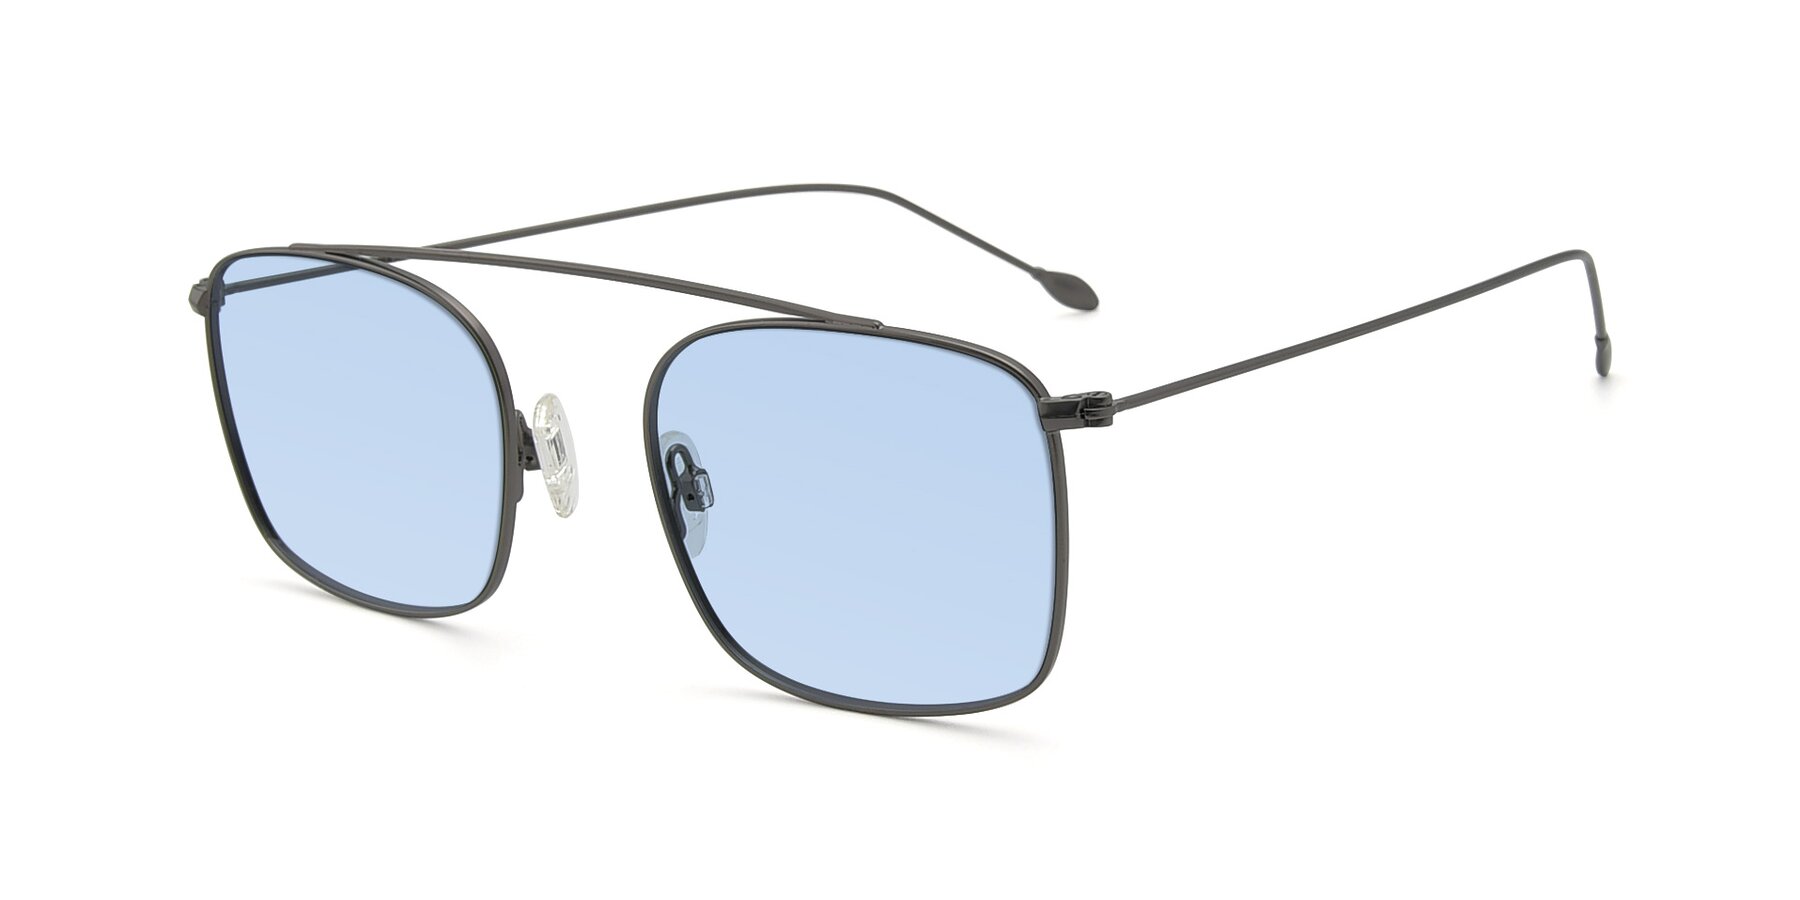 Angle of The Librarian in Gunmetal with Light Blue Tinted Lenses